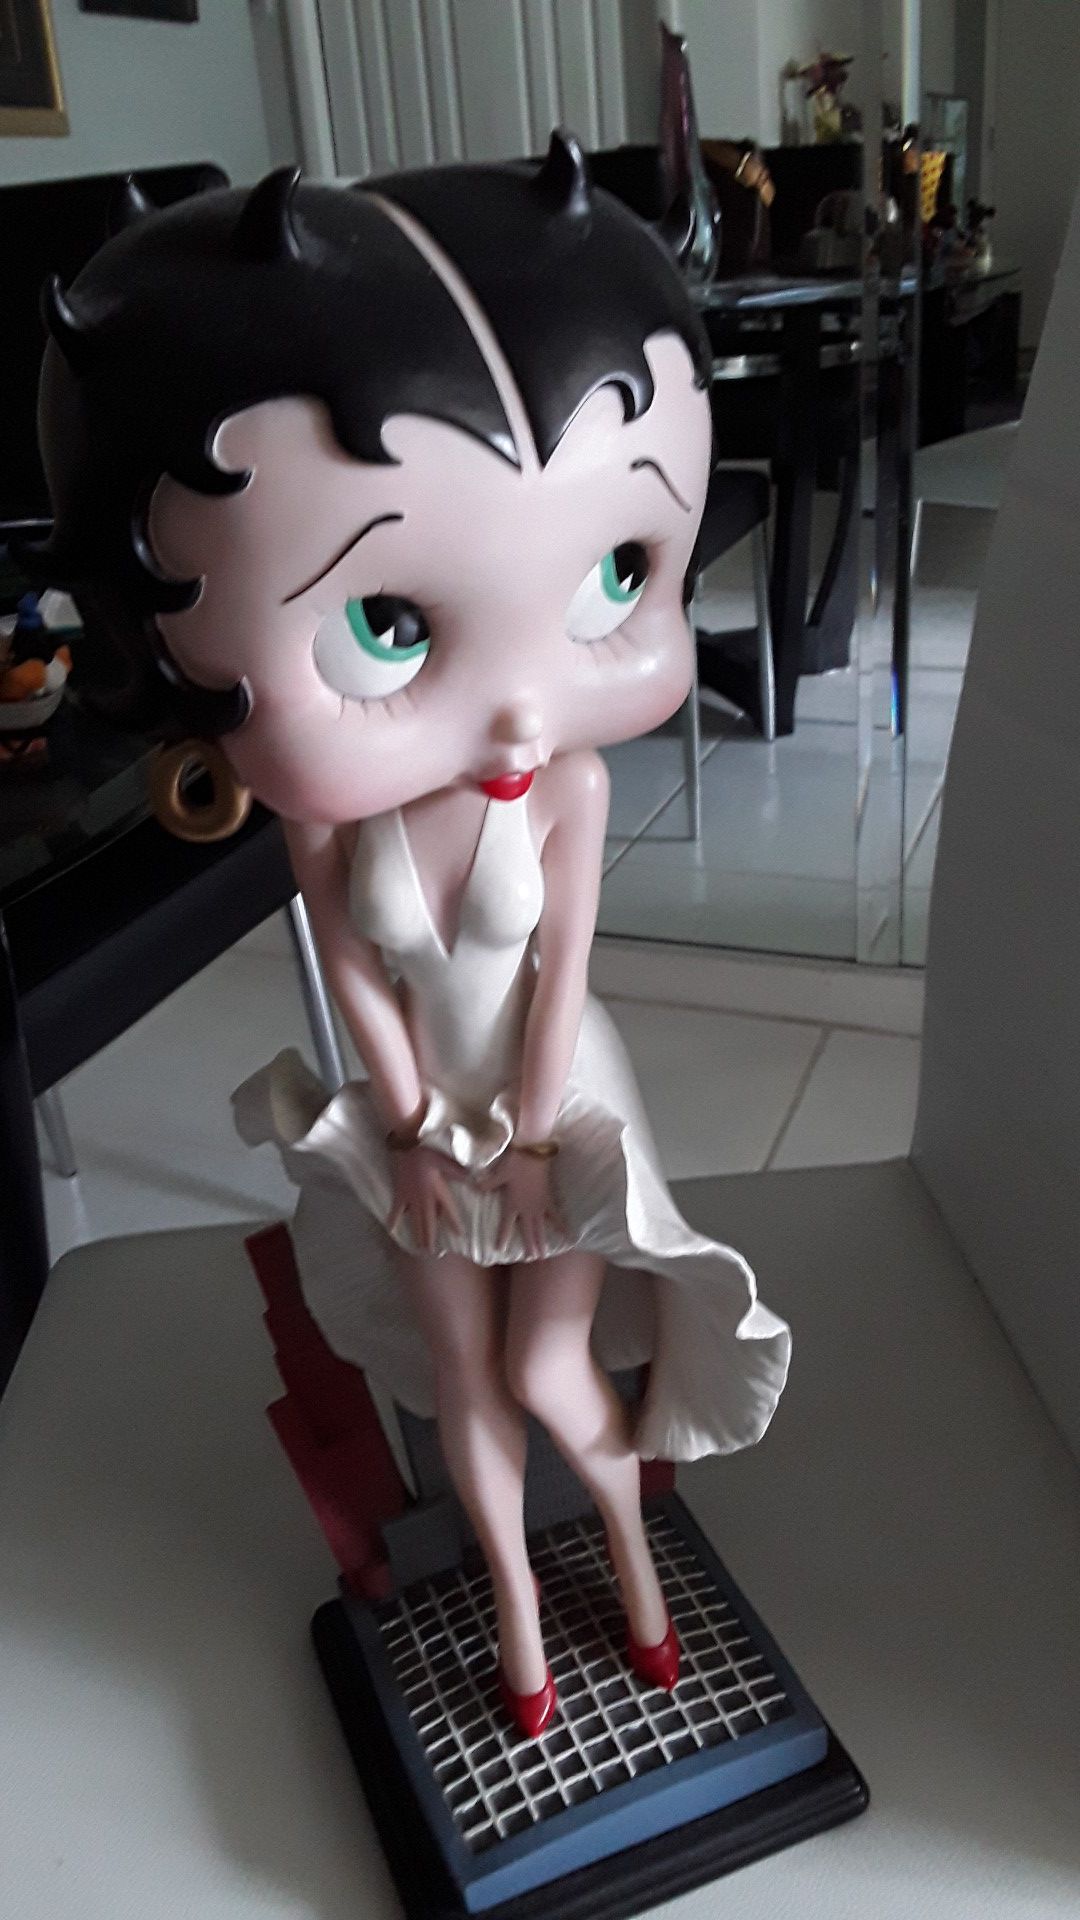 Betty Boop statue. Solid and heavy. The head was detached at one point and is now glued on but it is still a gorgeous piece and you cannot notice it.